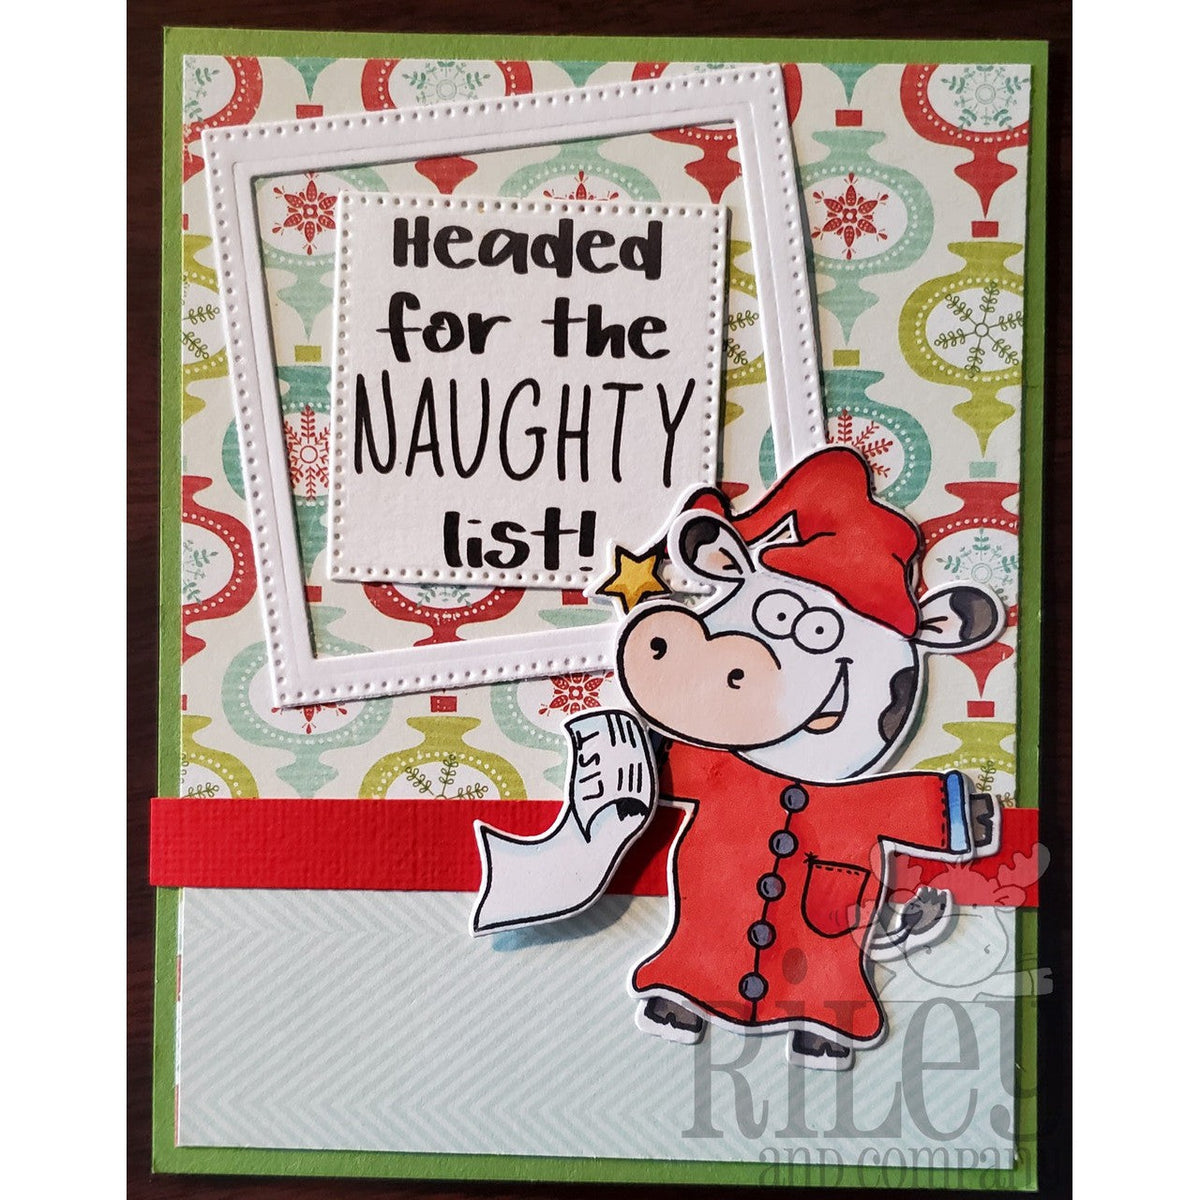 Bright Christmas 2 - 6x6 Paper Pad - New Release